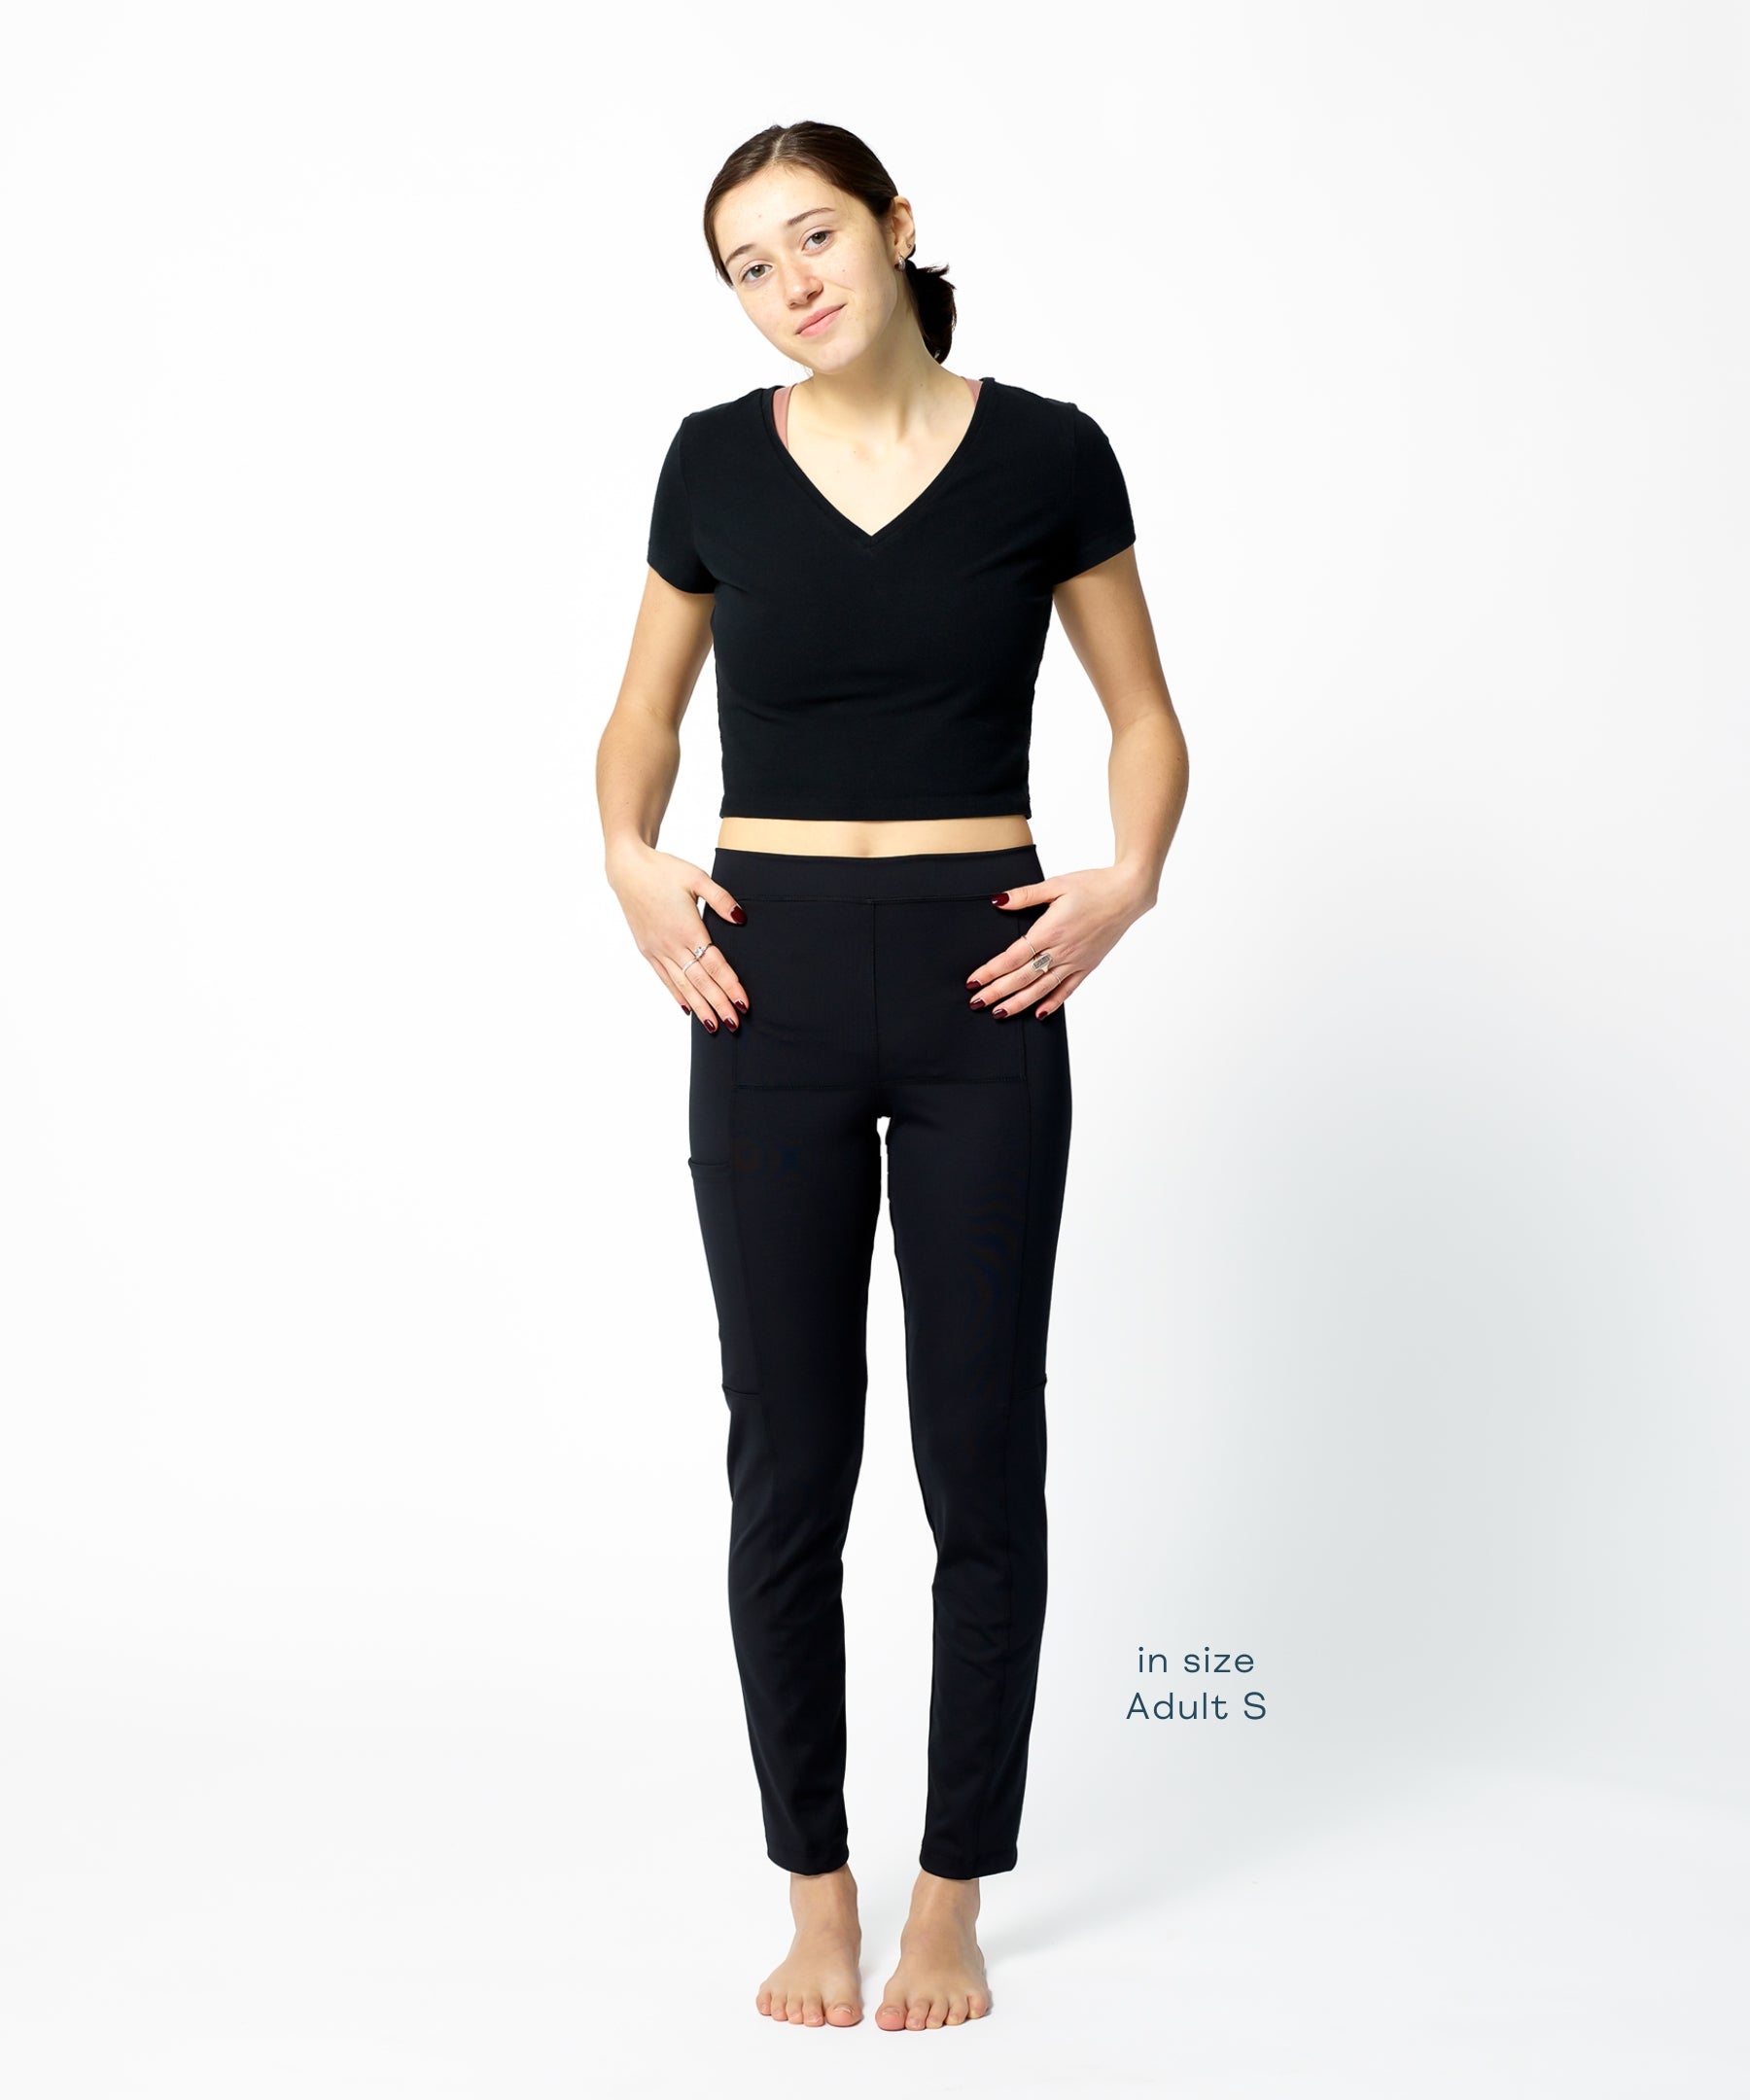 Nadia in Leggings with Sizing